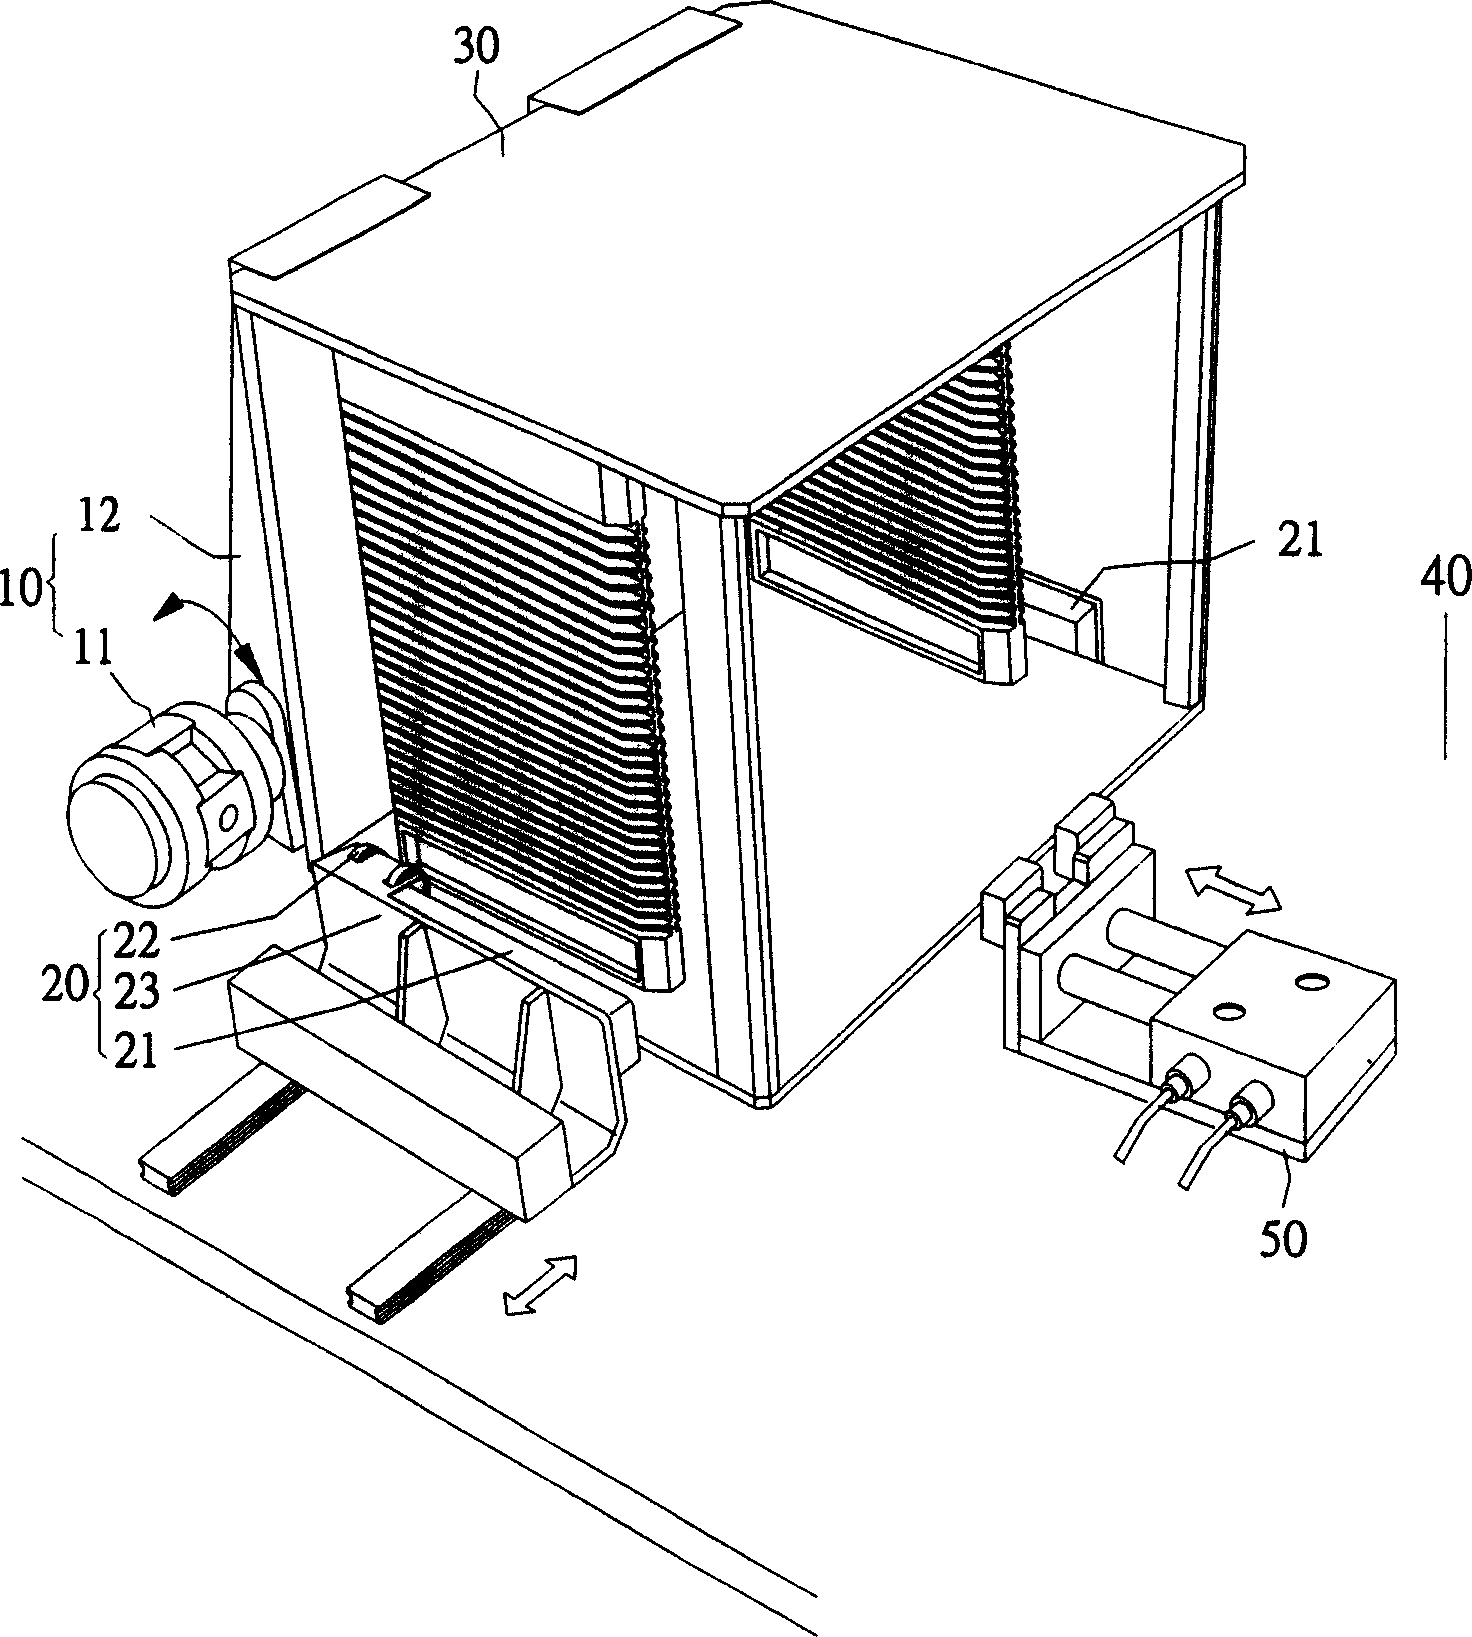 Carsette turning over and positioning device